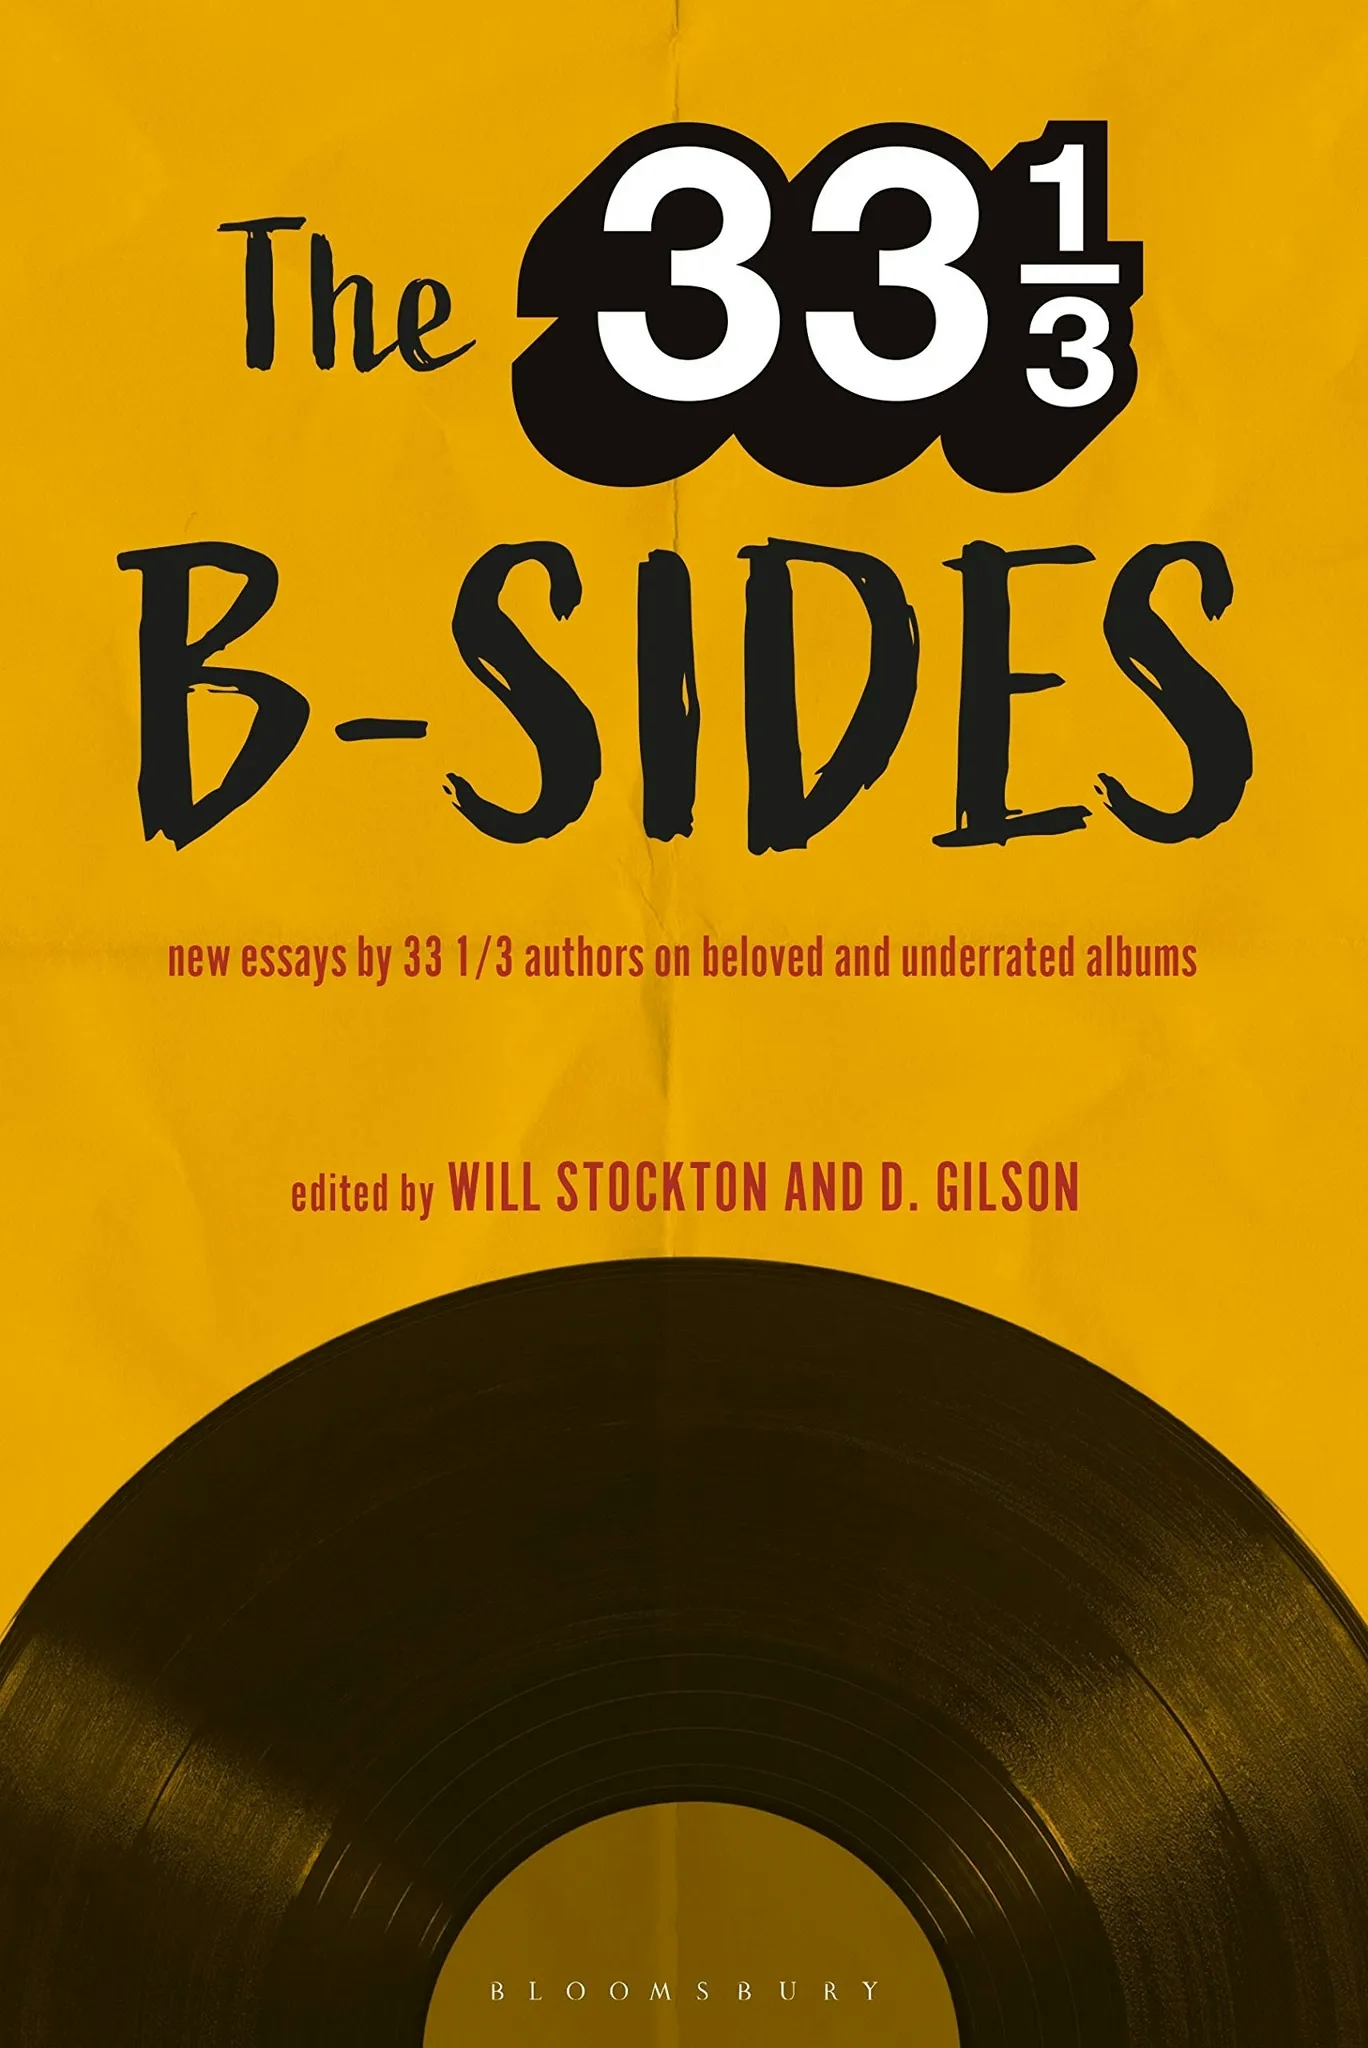 Album artwork for The 33 1/3 B-sides: New Essays by 33 1/3 Authors on Beloved and Underrated Albums by Will Stockton and D Gilson